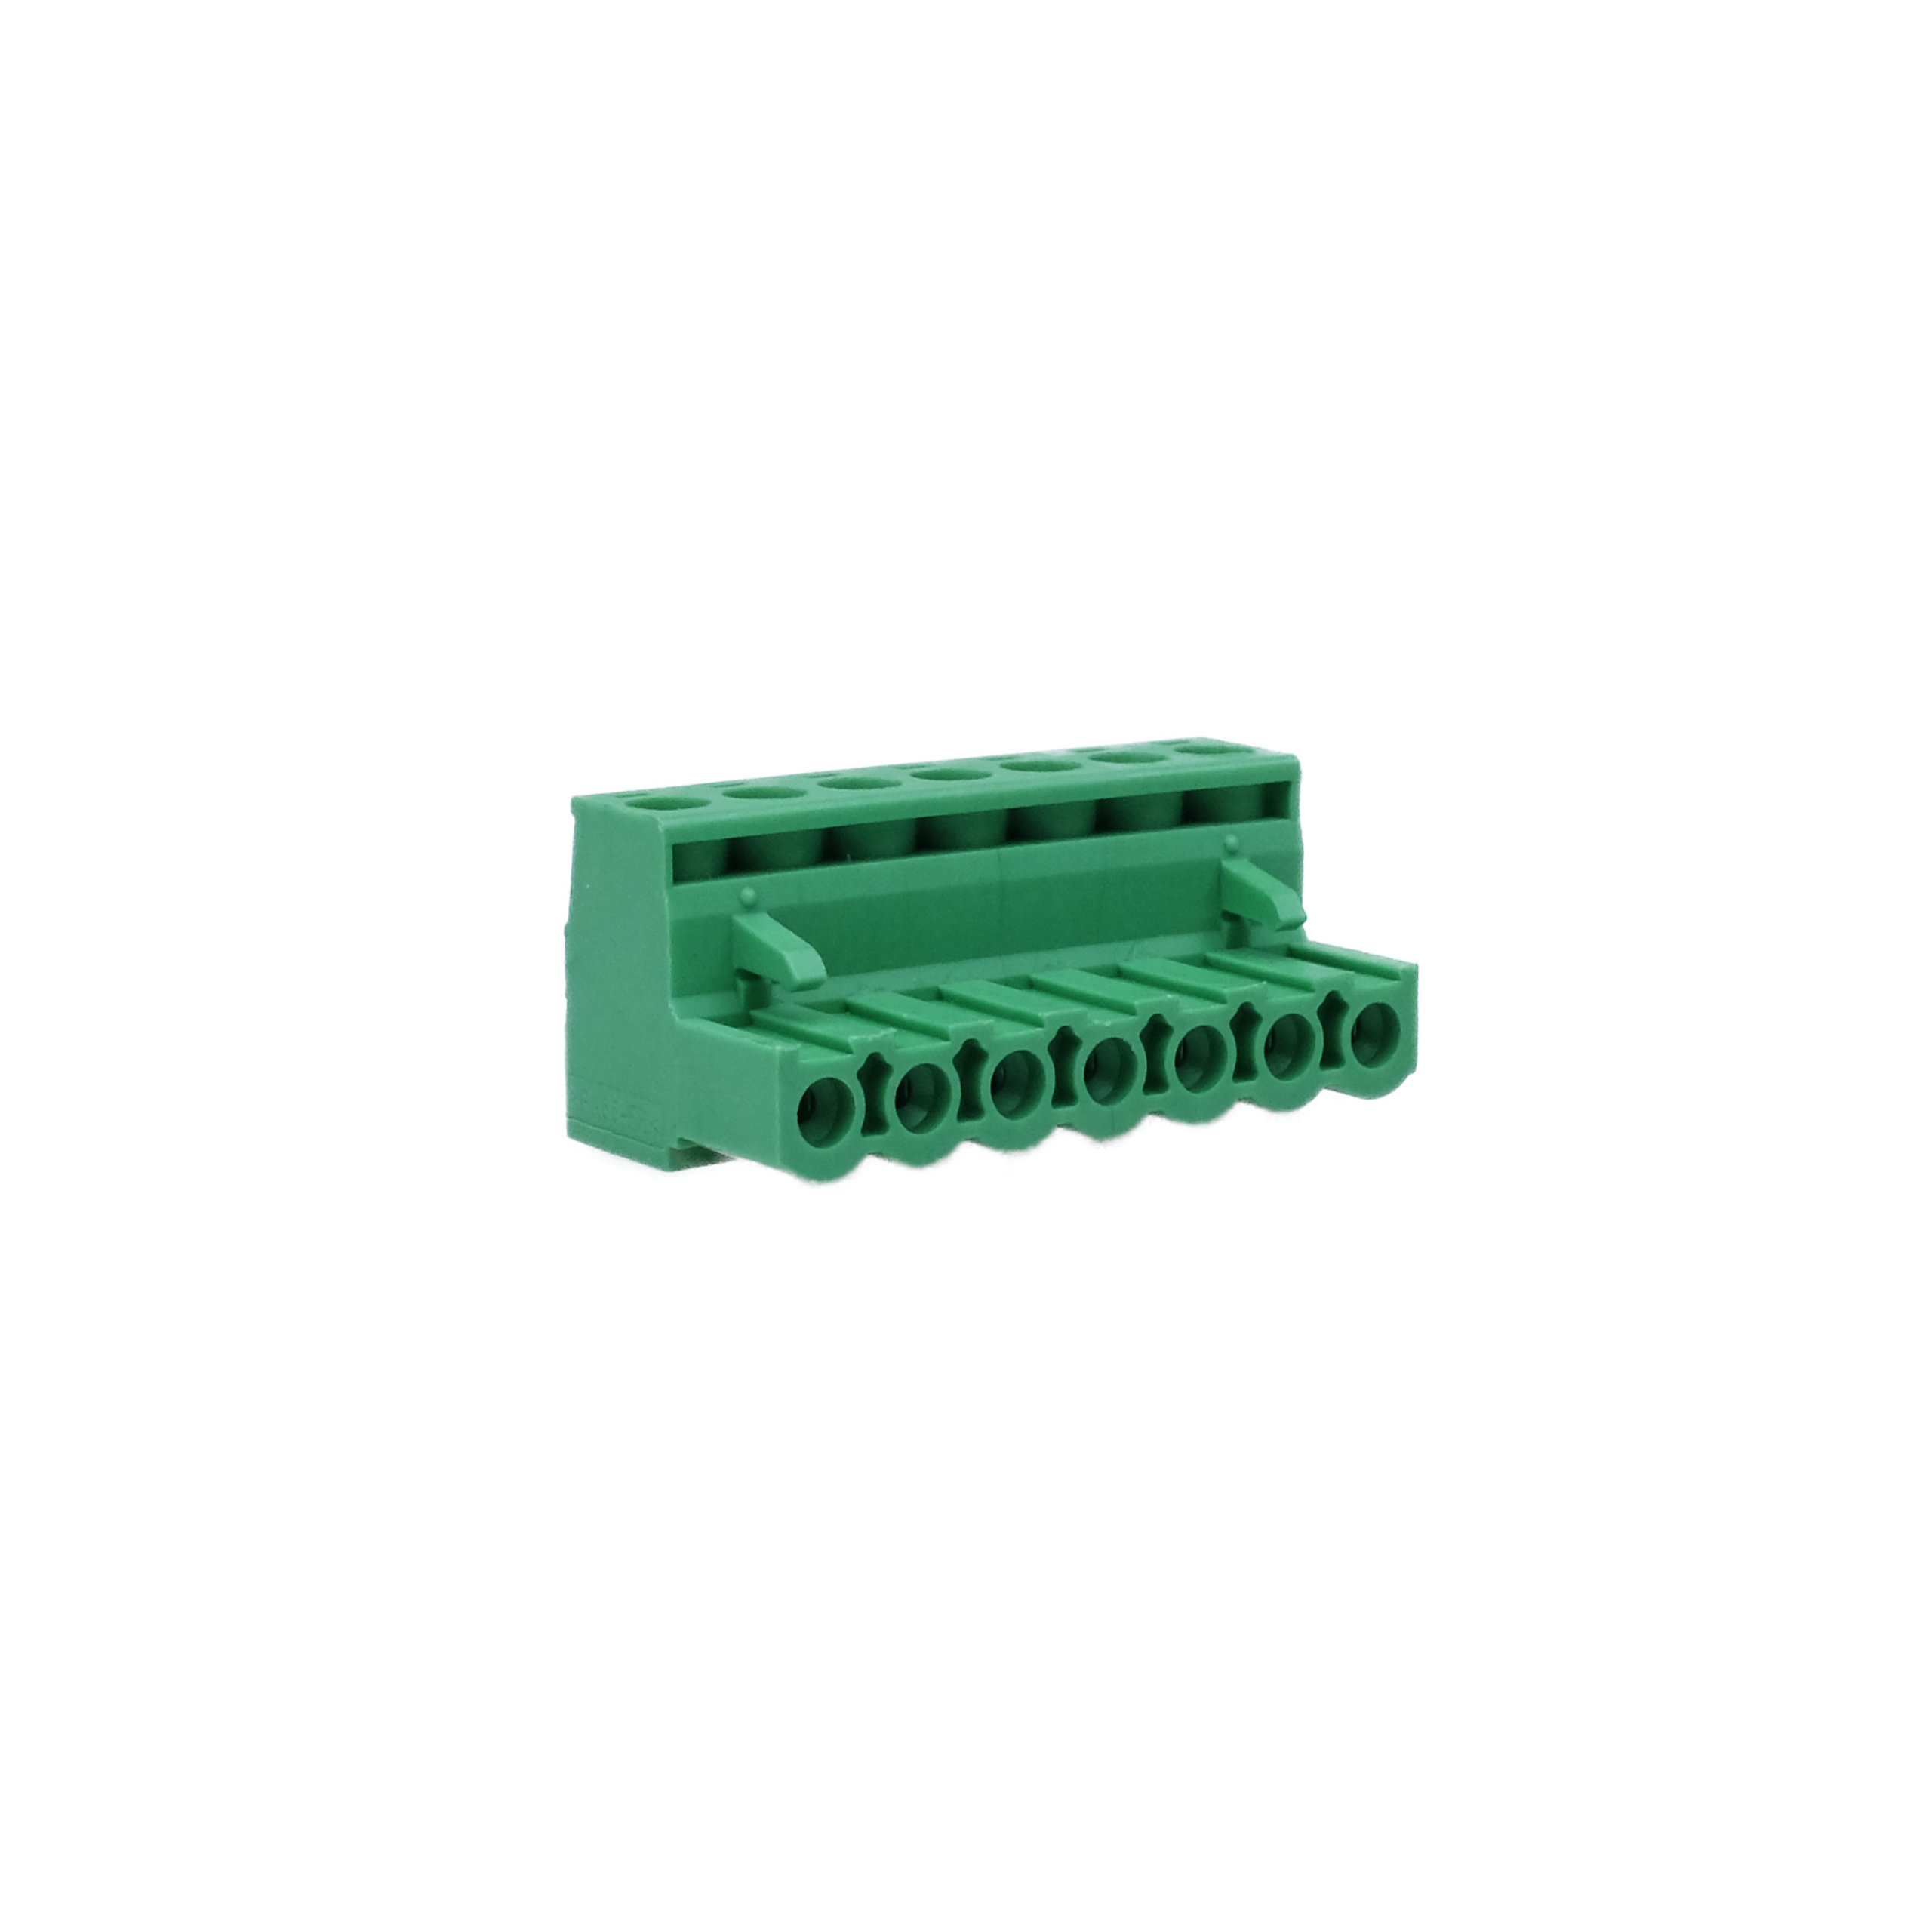 Phoenix Contact Connector MSTB 2.5/ 7-ST-5.08 7 pin 1757064